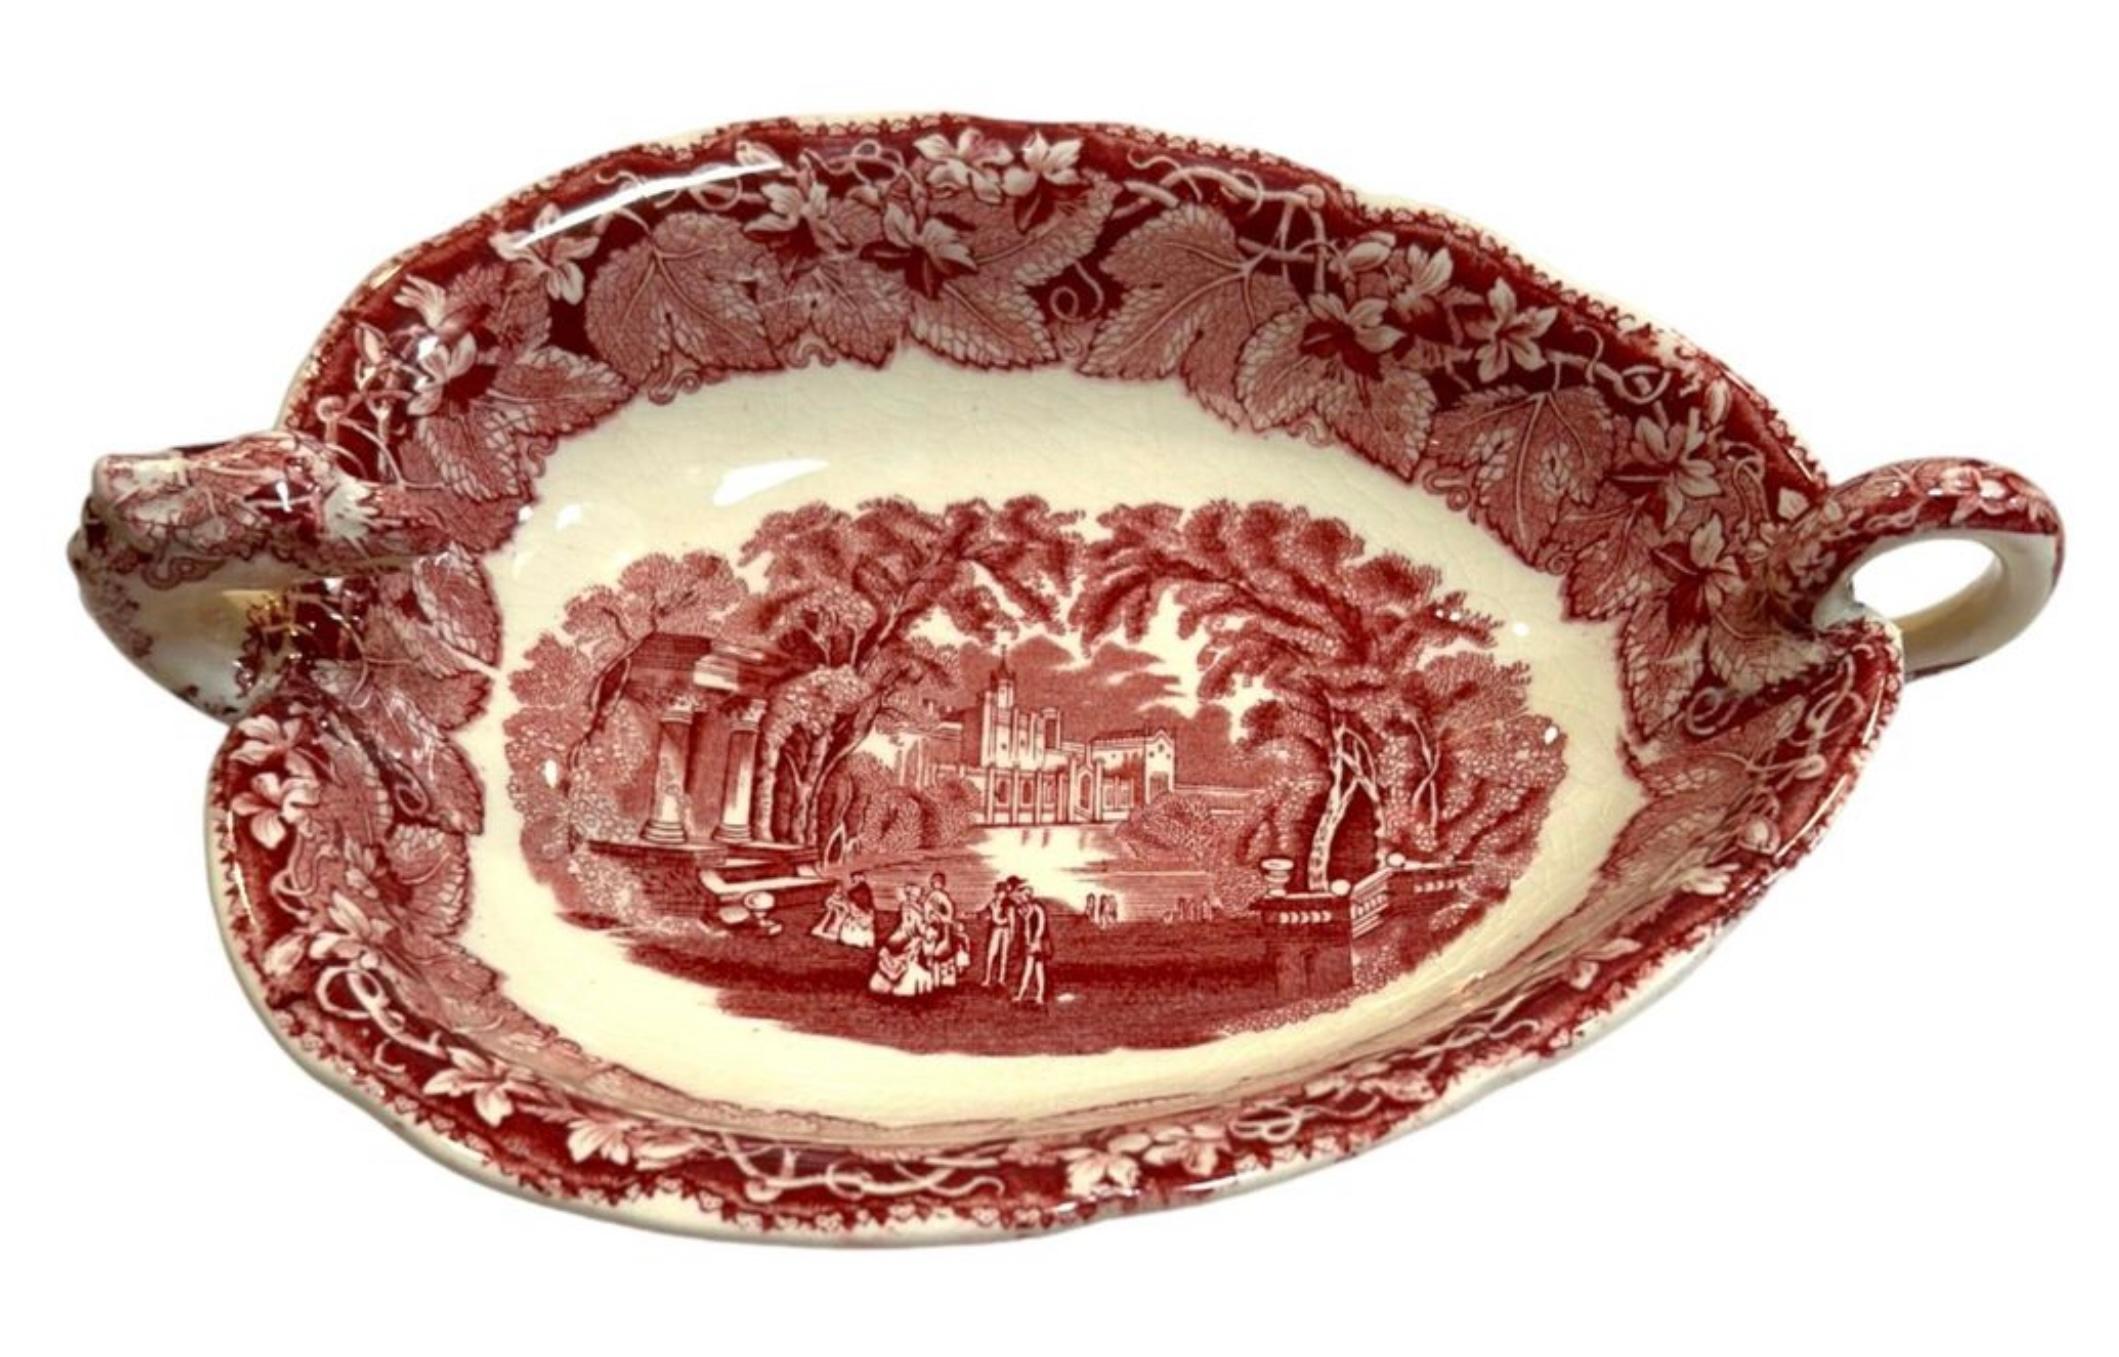 This 1950’s Mason’s serving dish is a rare find for collectors.  The charming red color and dragon design make is a unique addition to any collection.  It features the head of a dragon at one end and the tail at the other to form the handle, resting